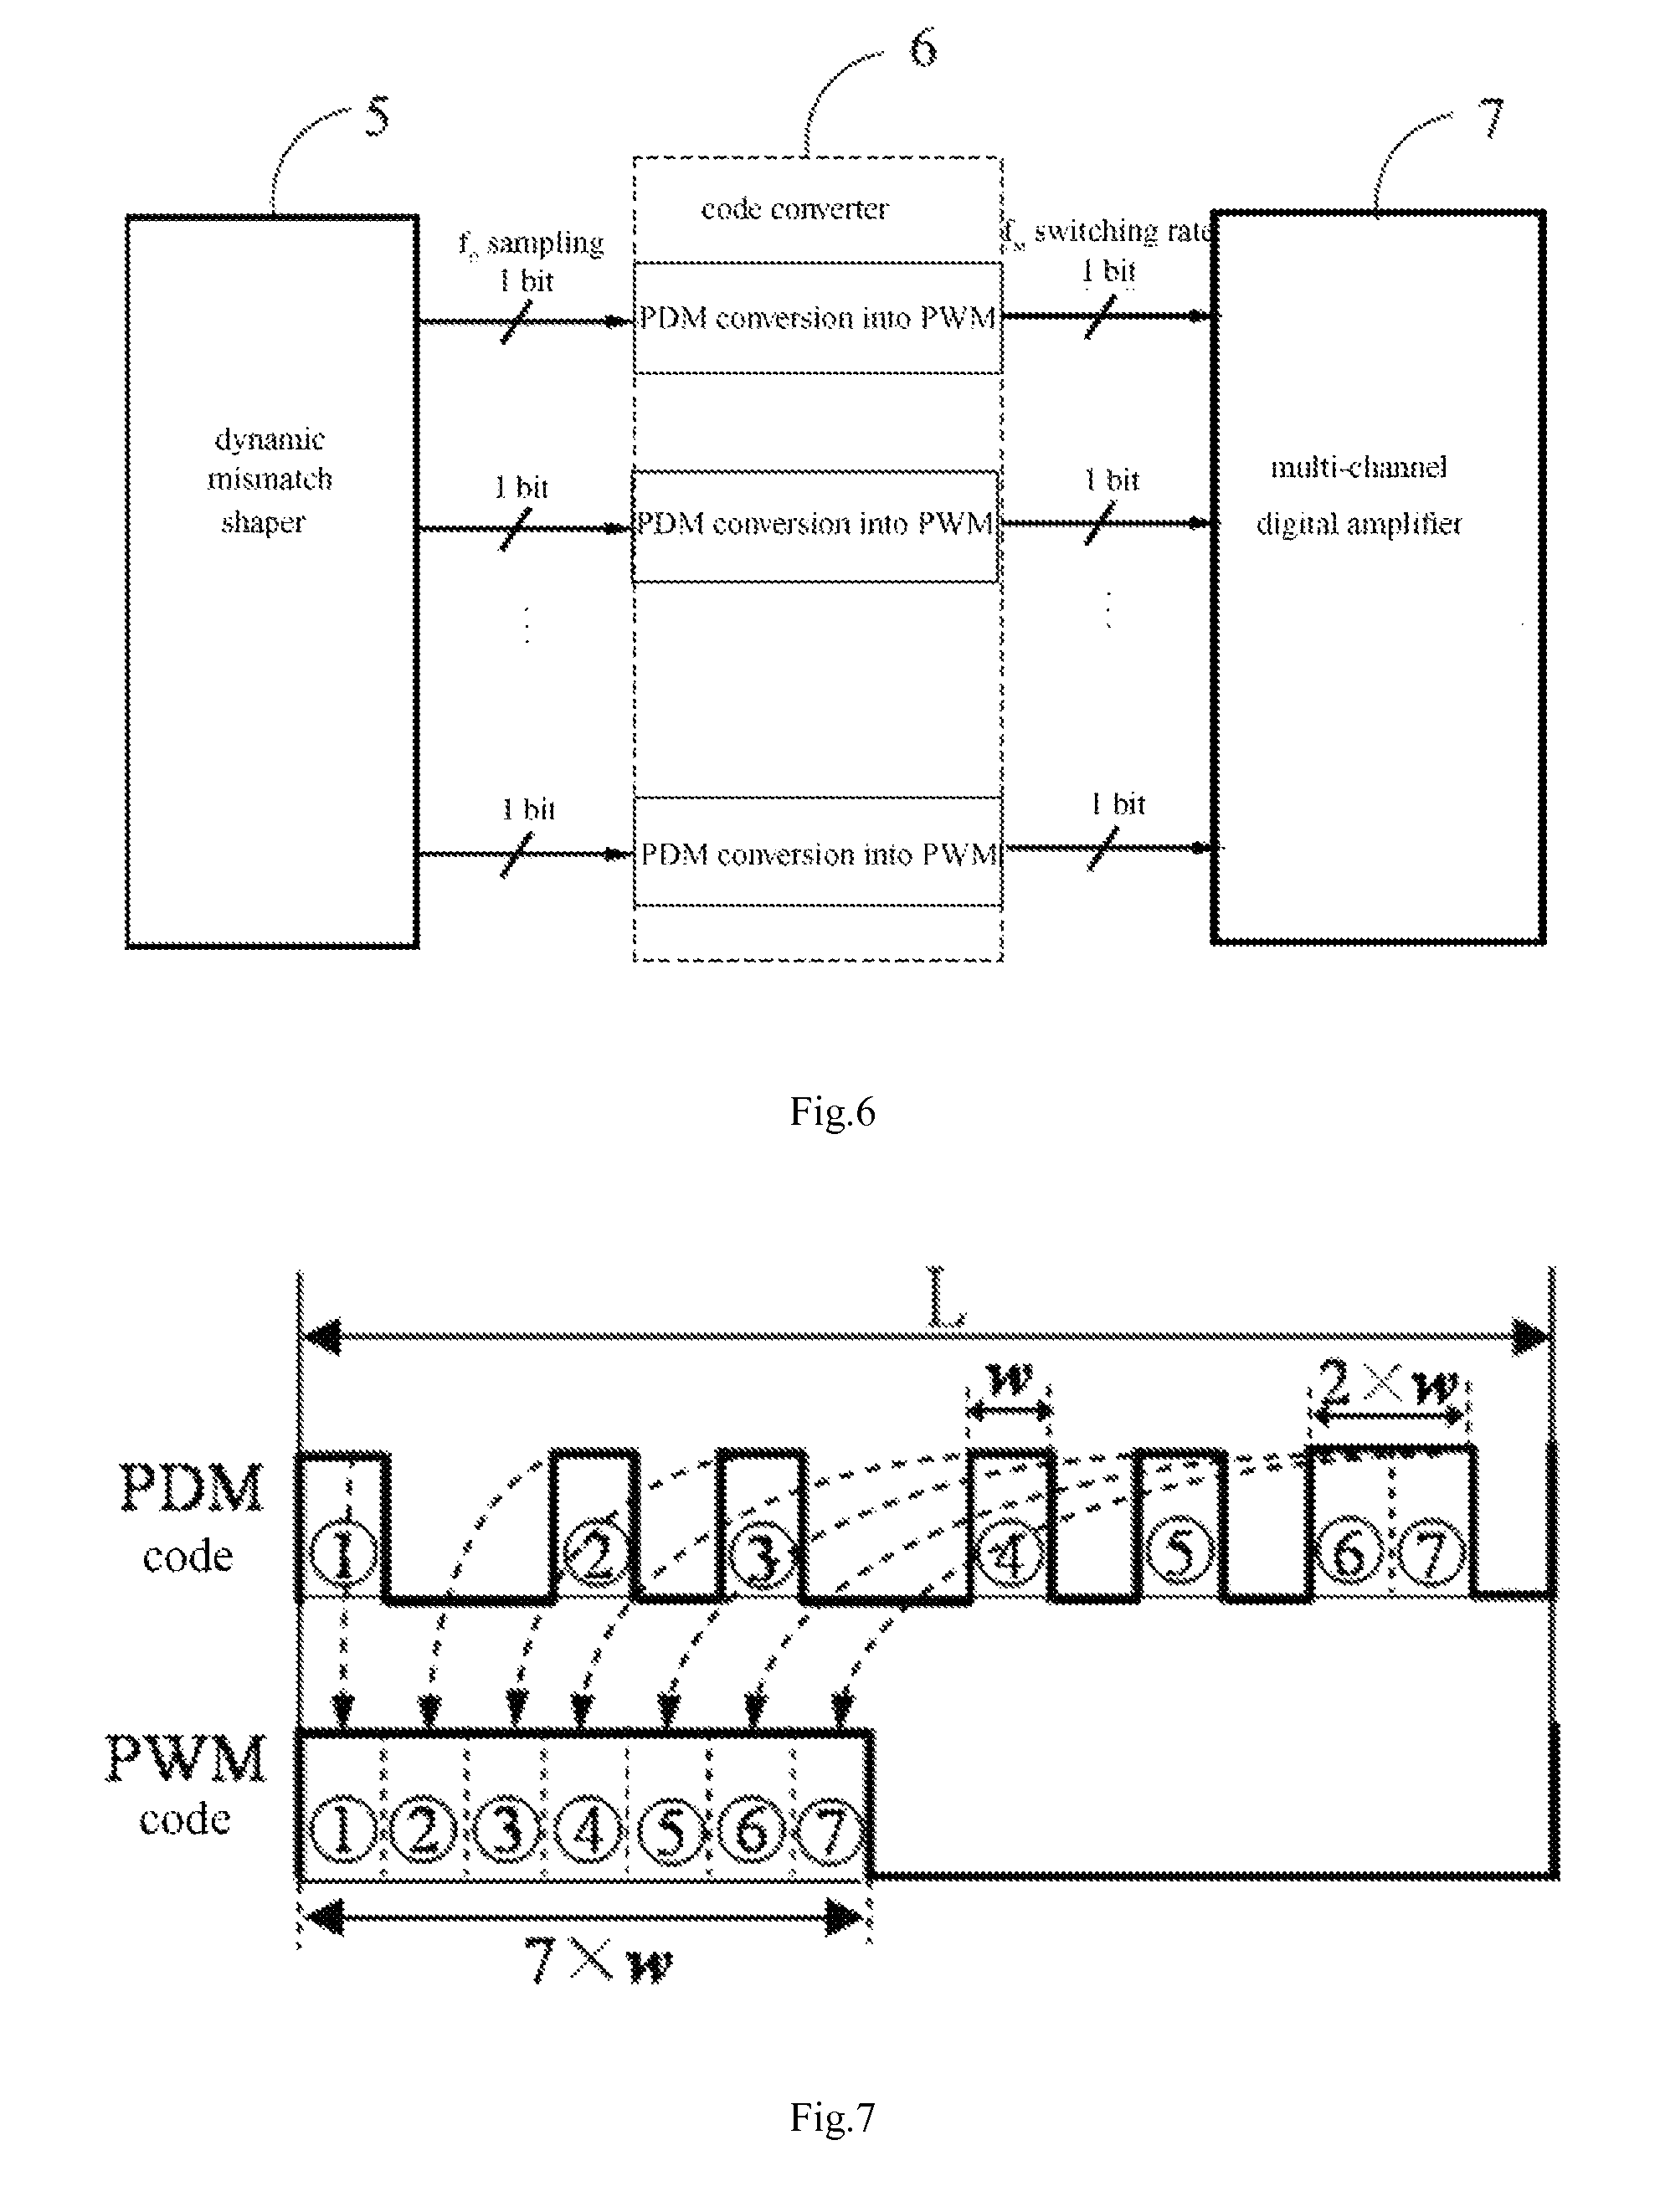 Method and device for driving digital speaker based on code conversion